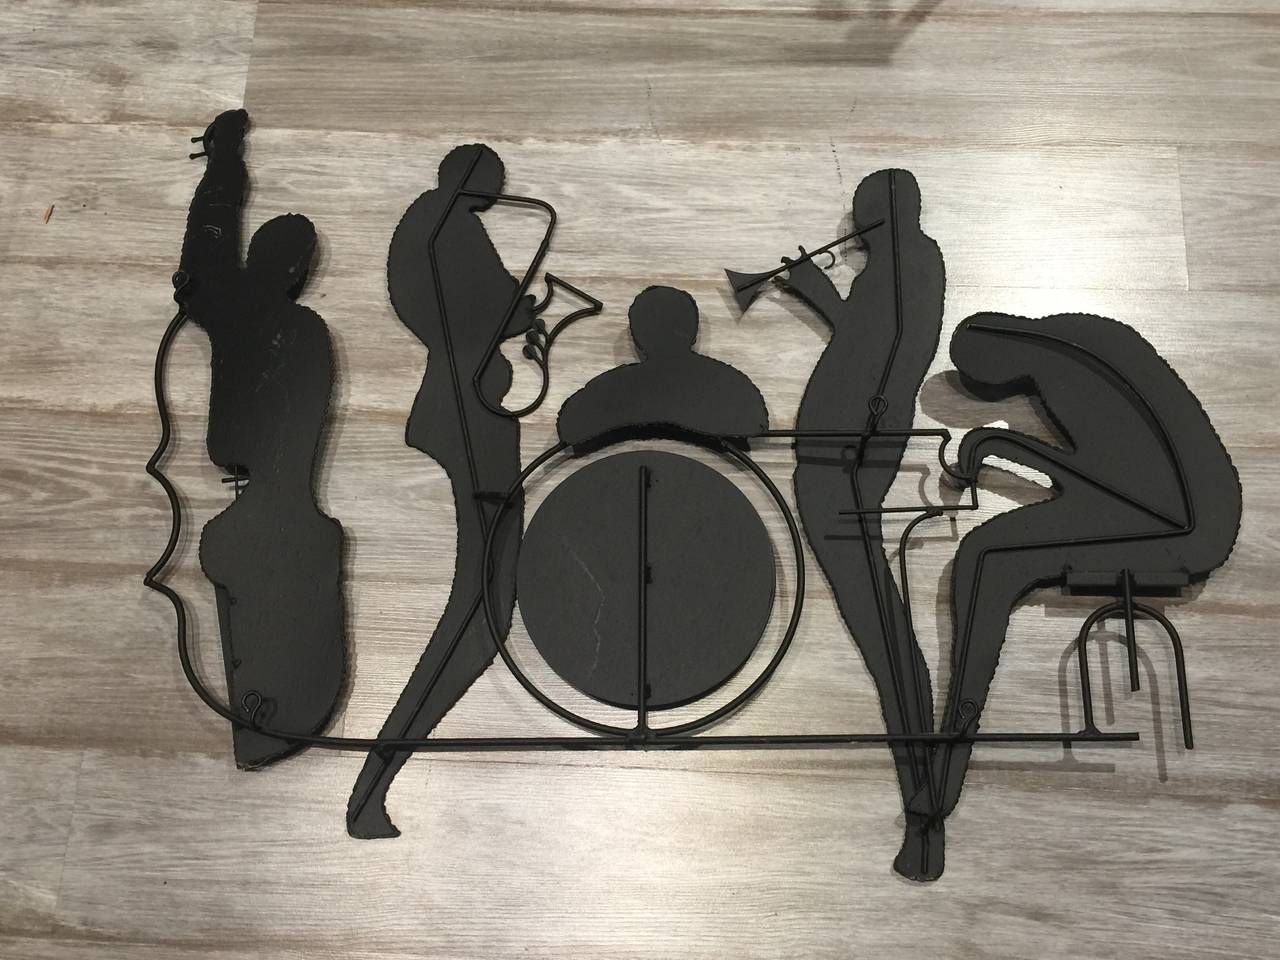 jazz band silhouette